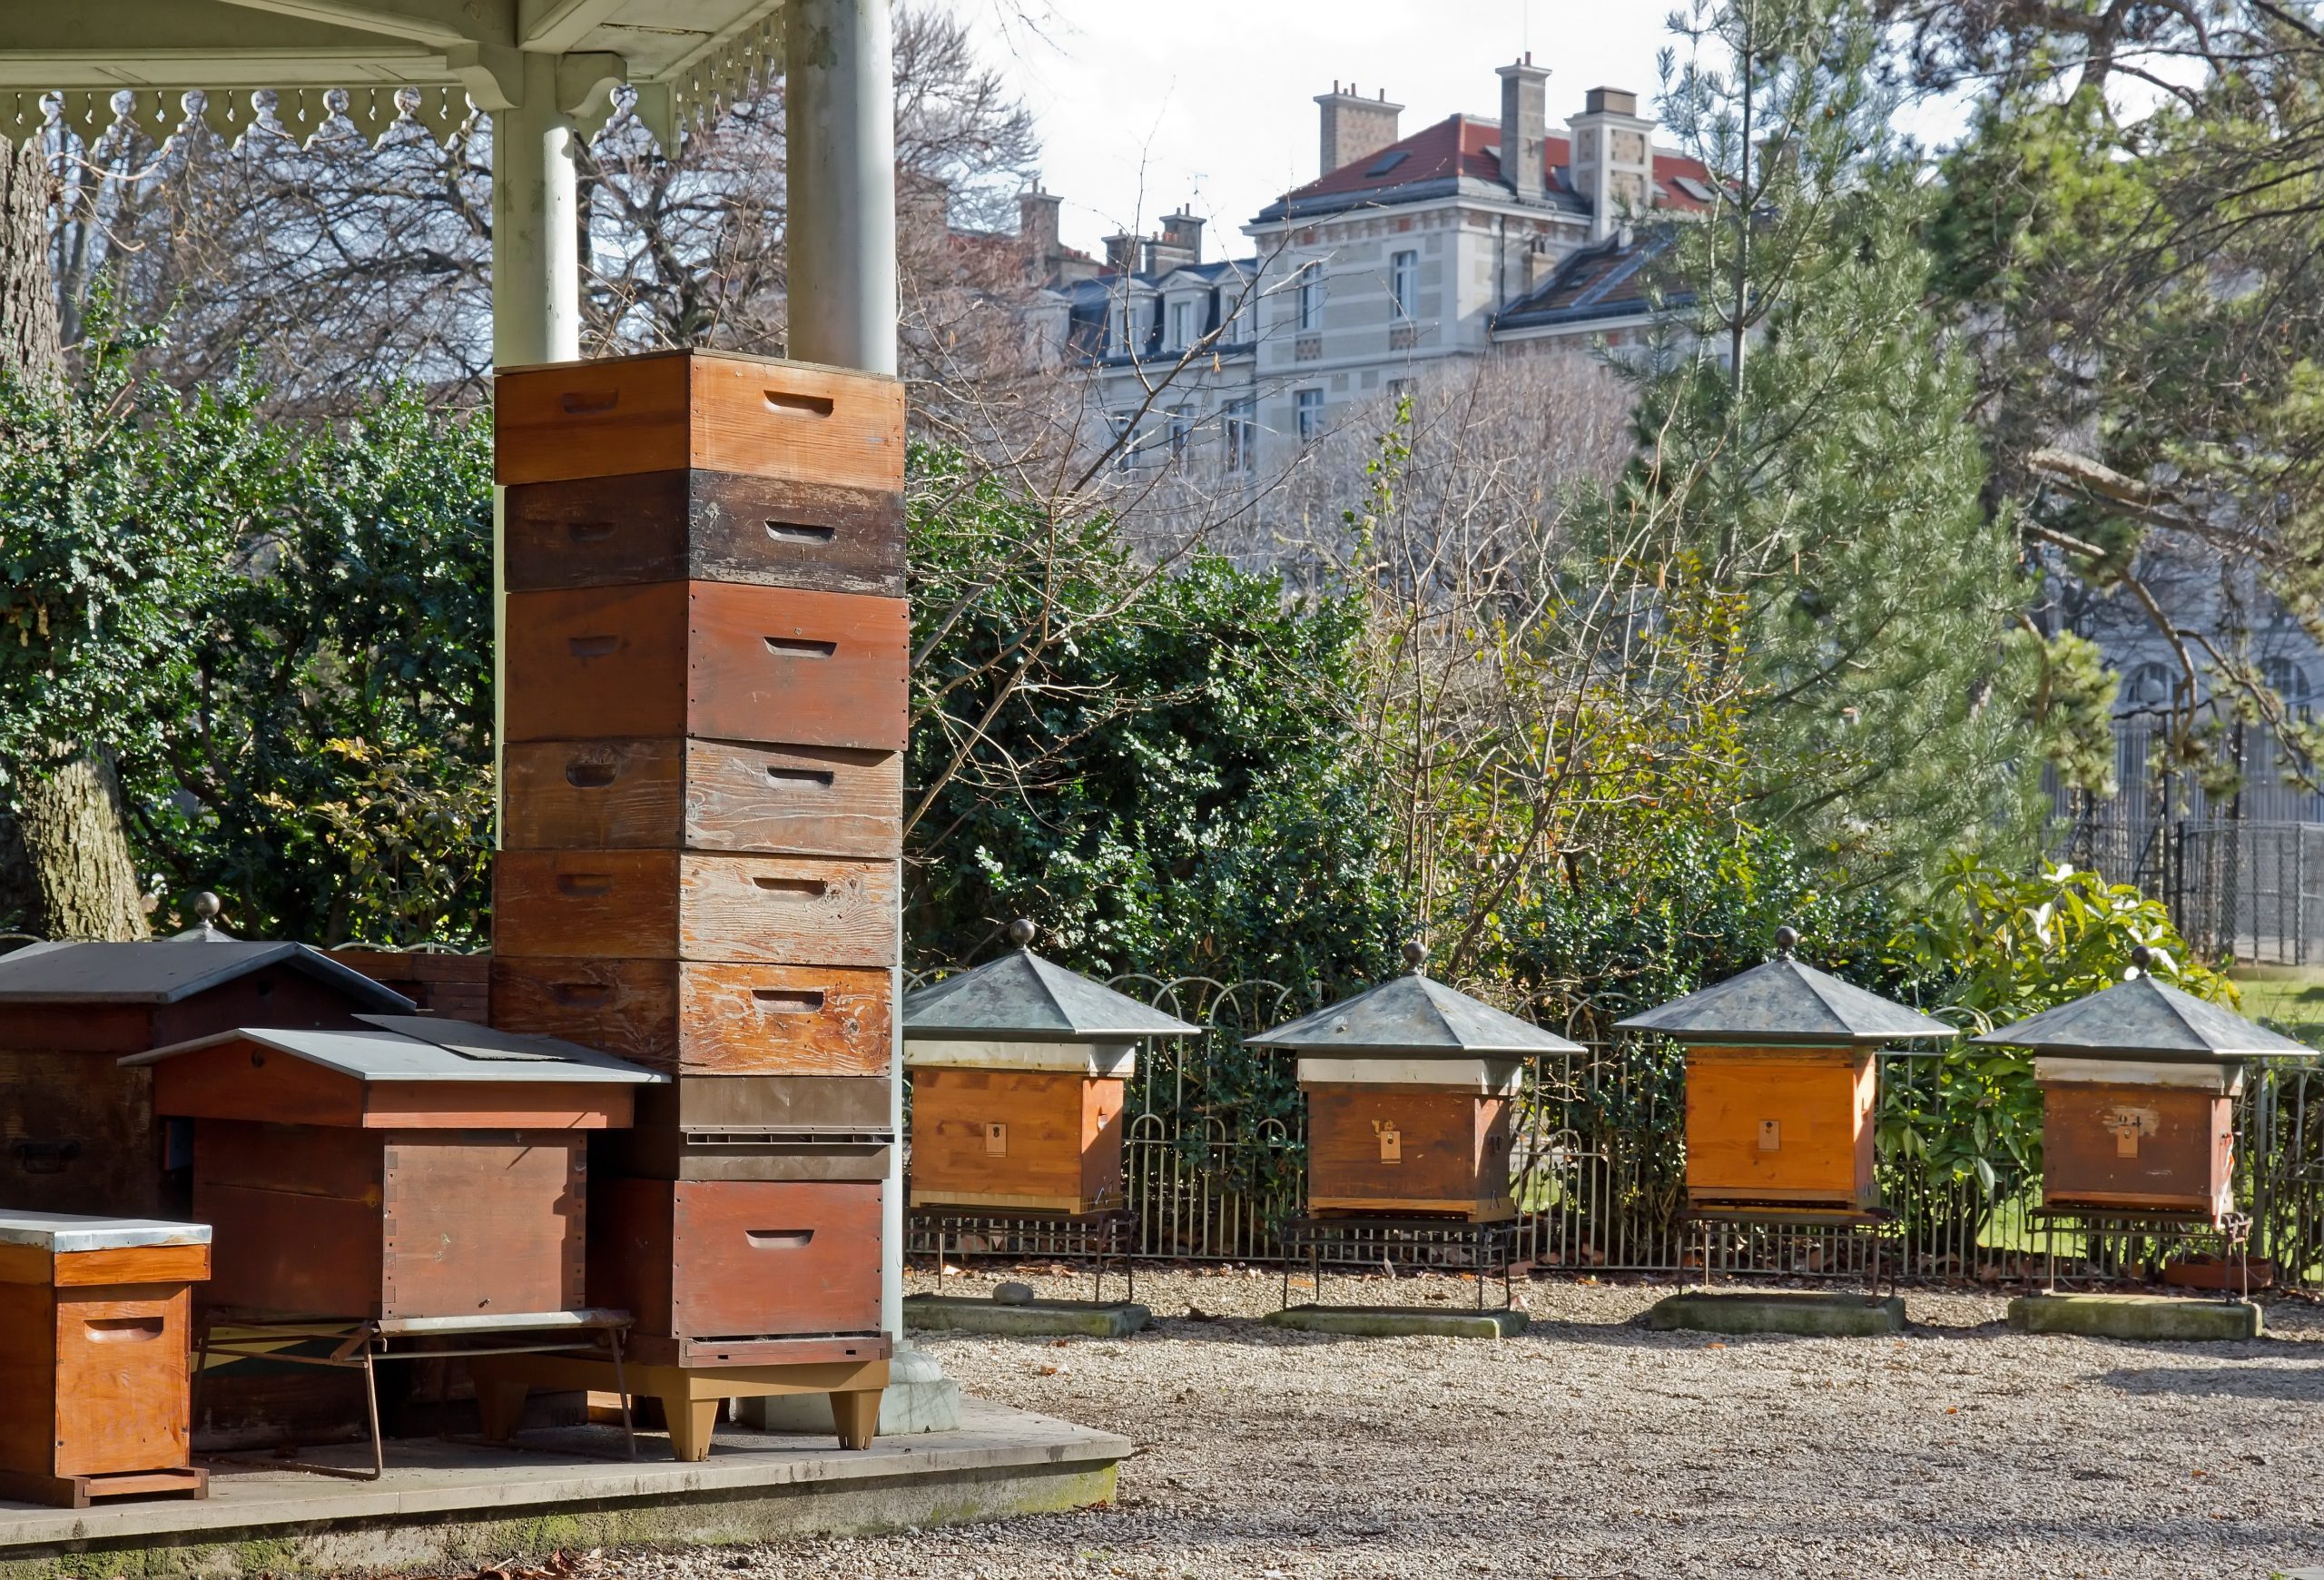 New York City Honeybees and Their Diets